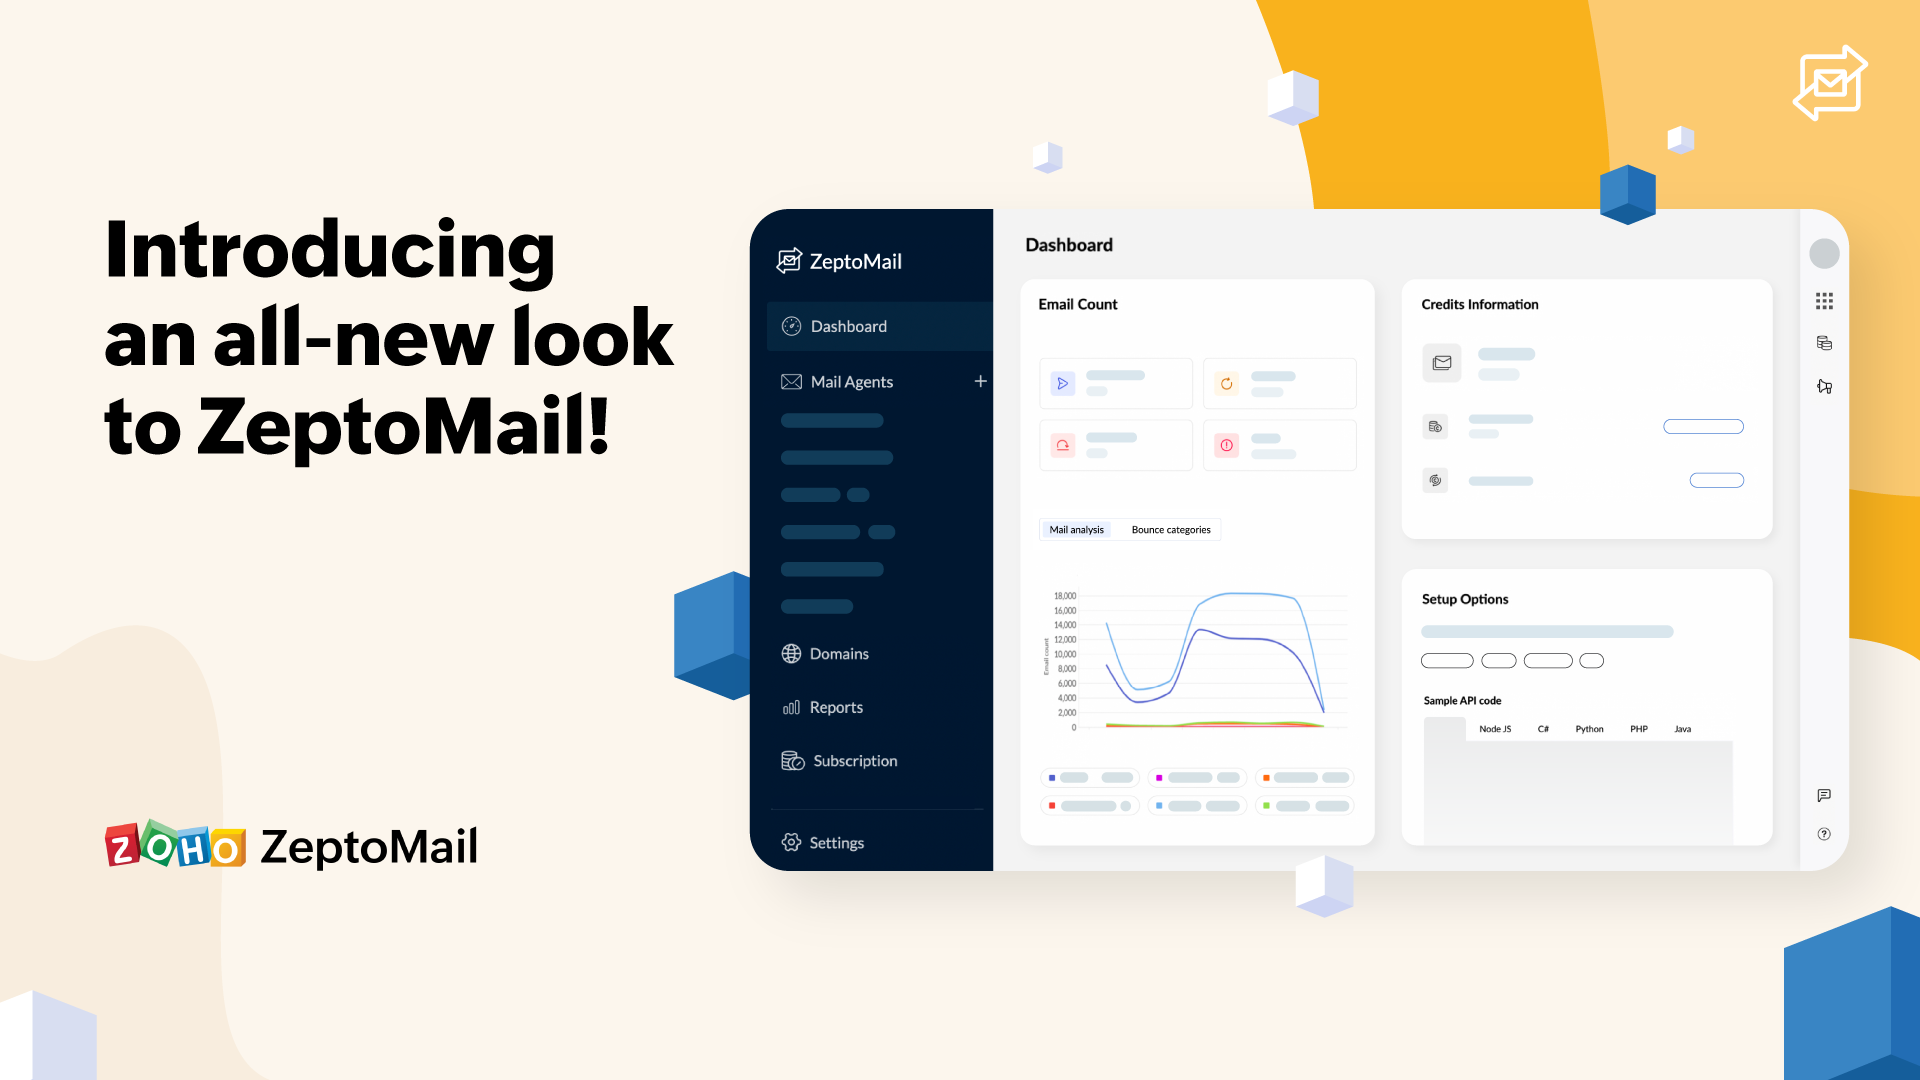 Introducing a new look to ZeptoMail!